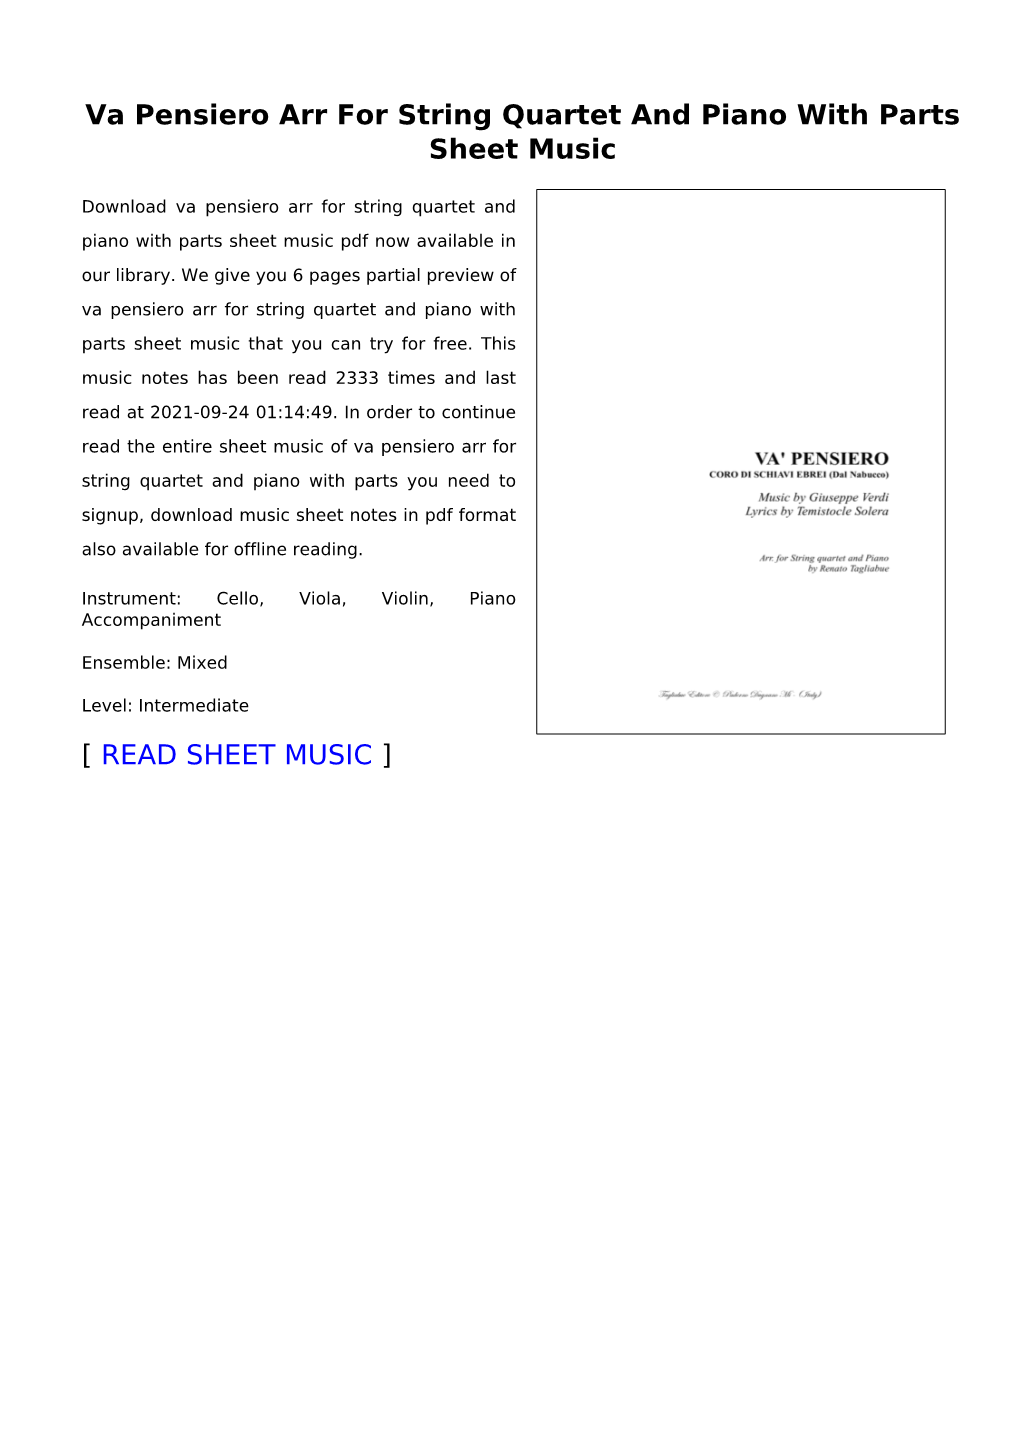 Va Pensiero Arr for String Quartet and Piano with Parts Sheet Music